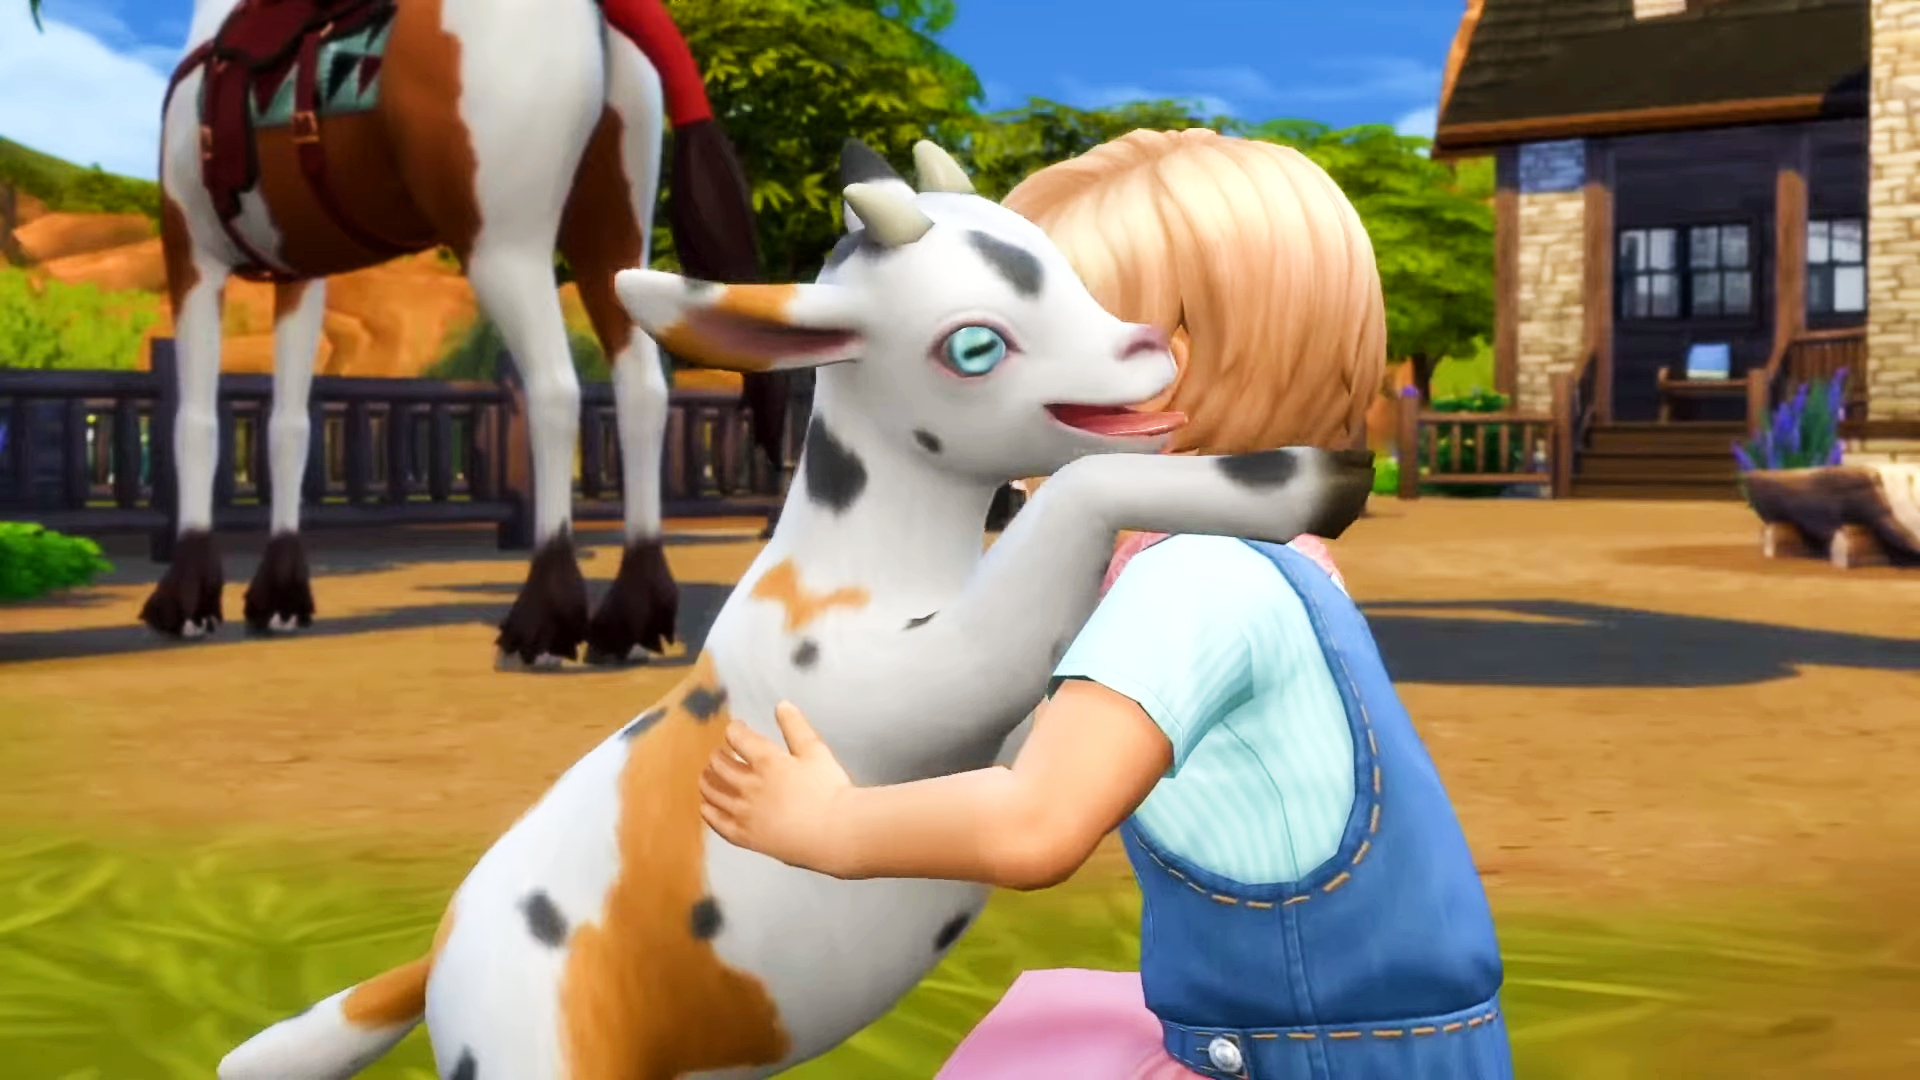 Yee-Haw! Release Date for The Sims 4 Horse Ranch Confirmed